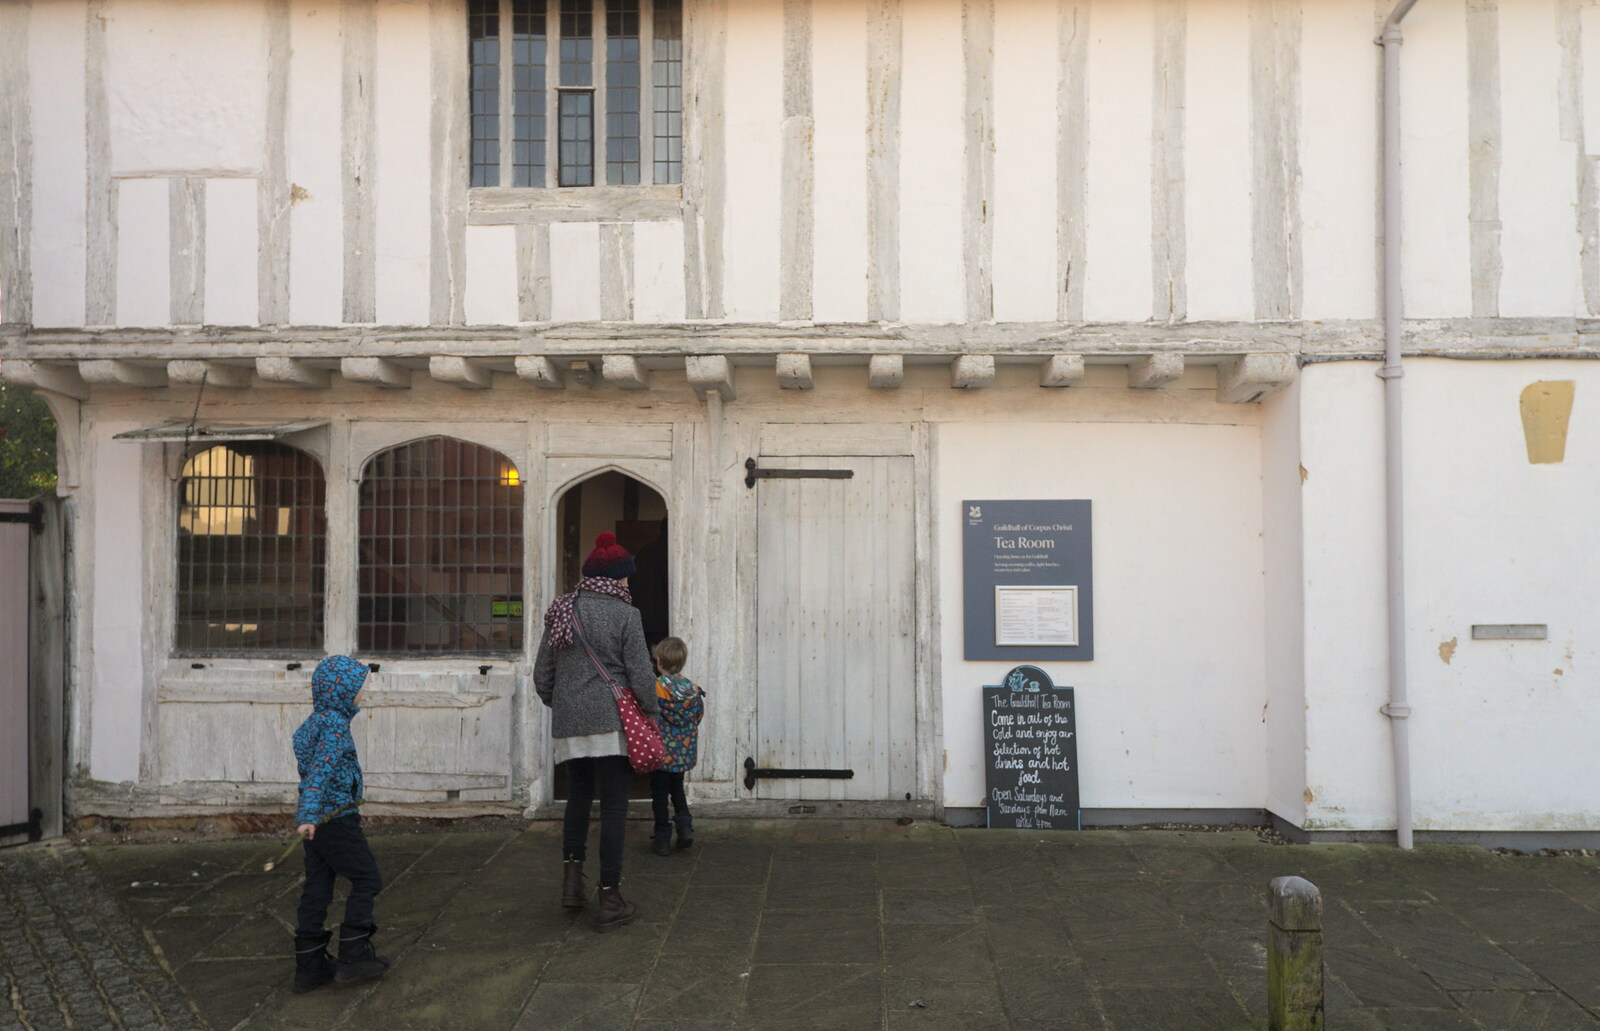 We head into the National Trust tea rooms from A Day in Lavenham, Suffolk - 22nd January 2017